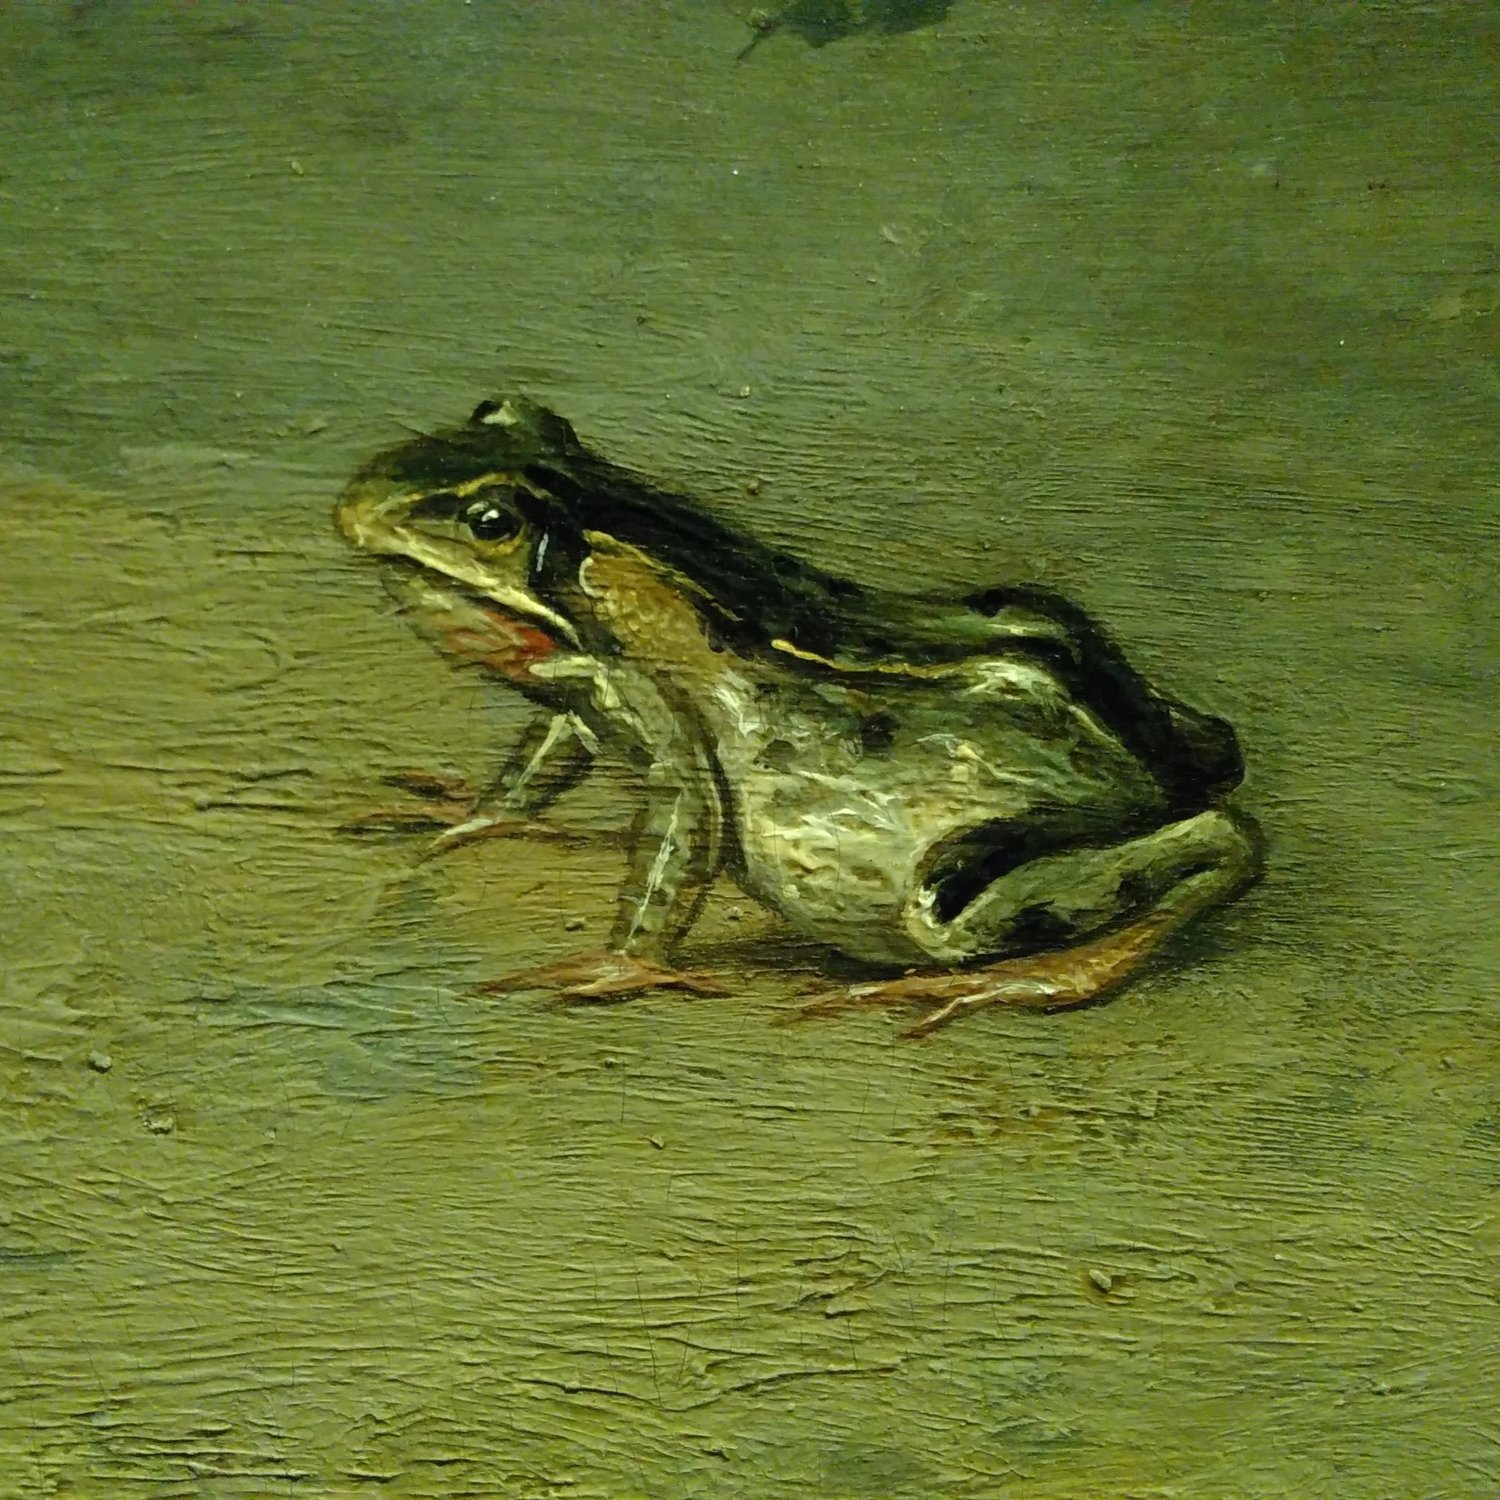 242: The Frogs, by Aristophanes